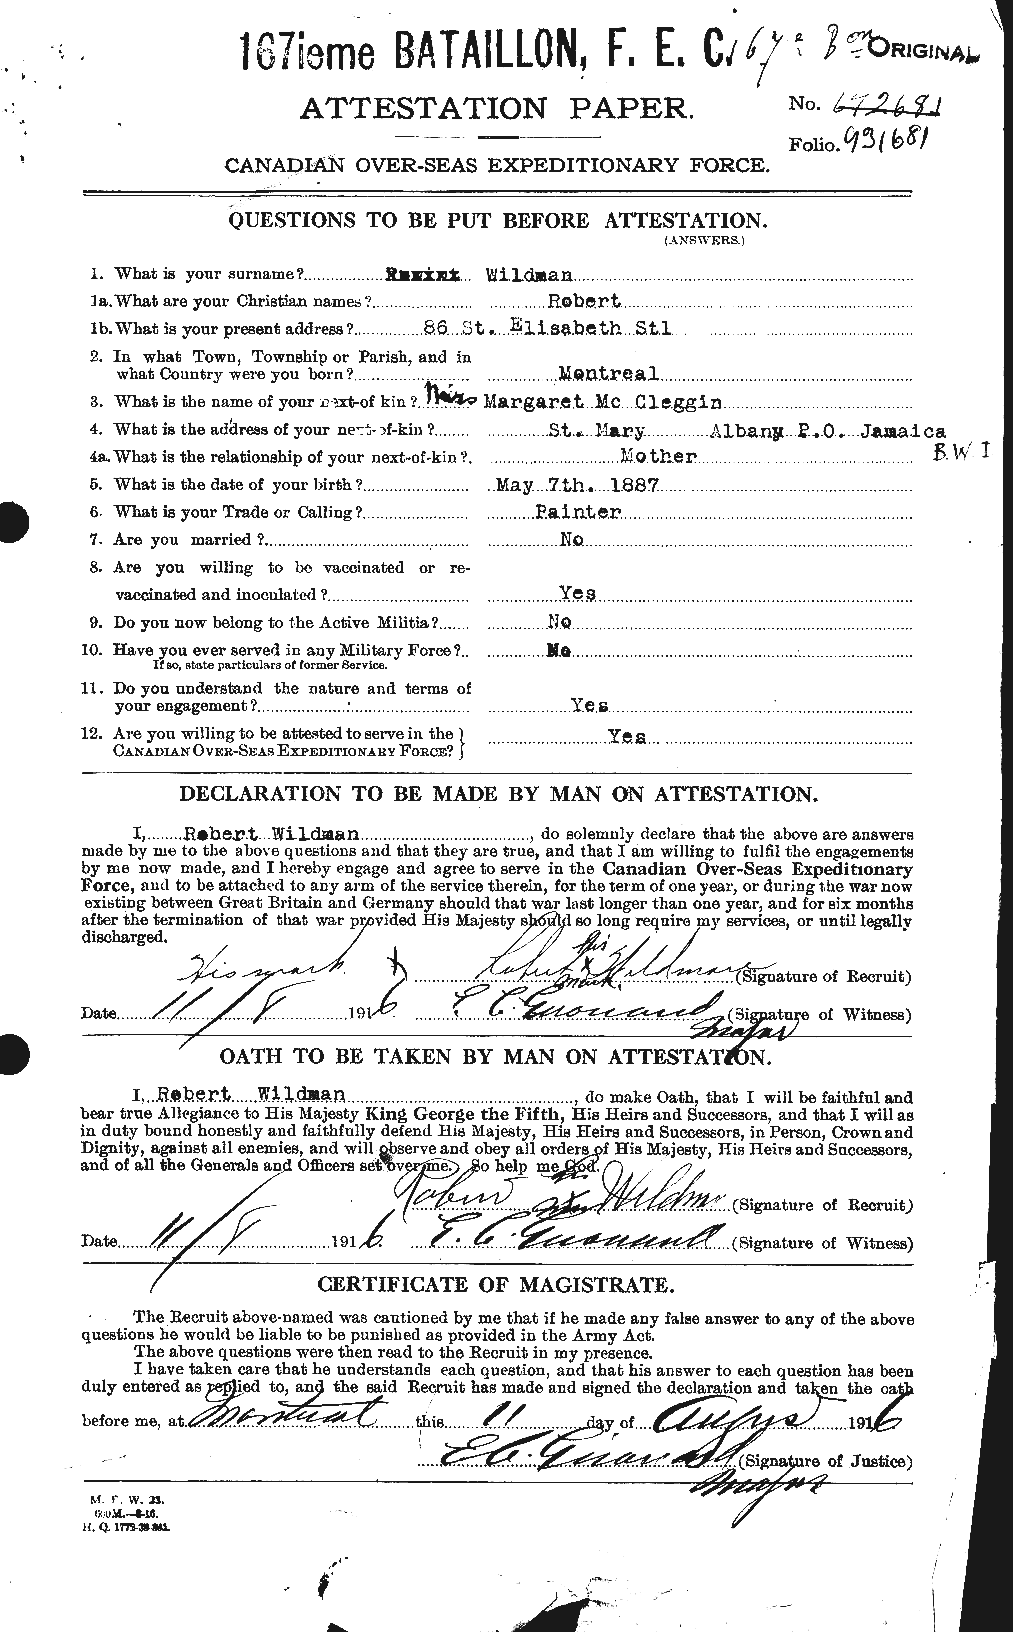 Personnel Records of the First World War - CEF 680136a